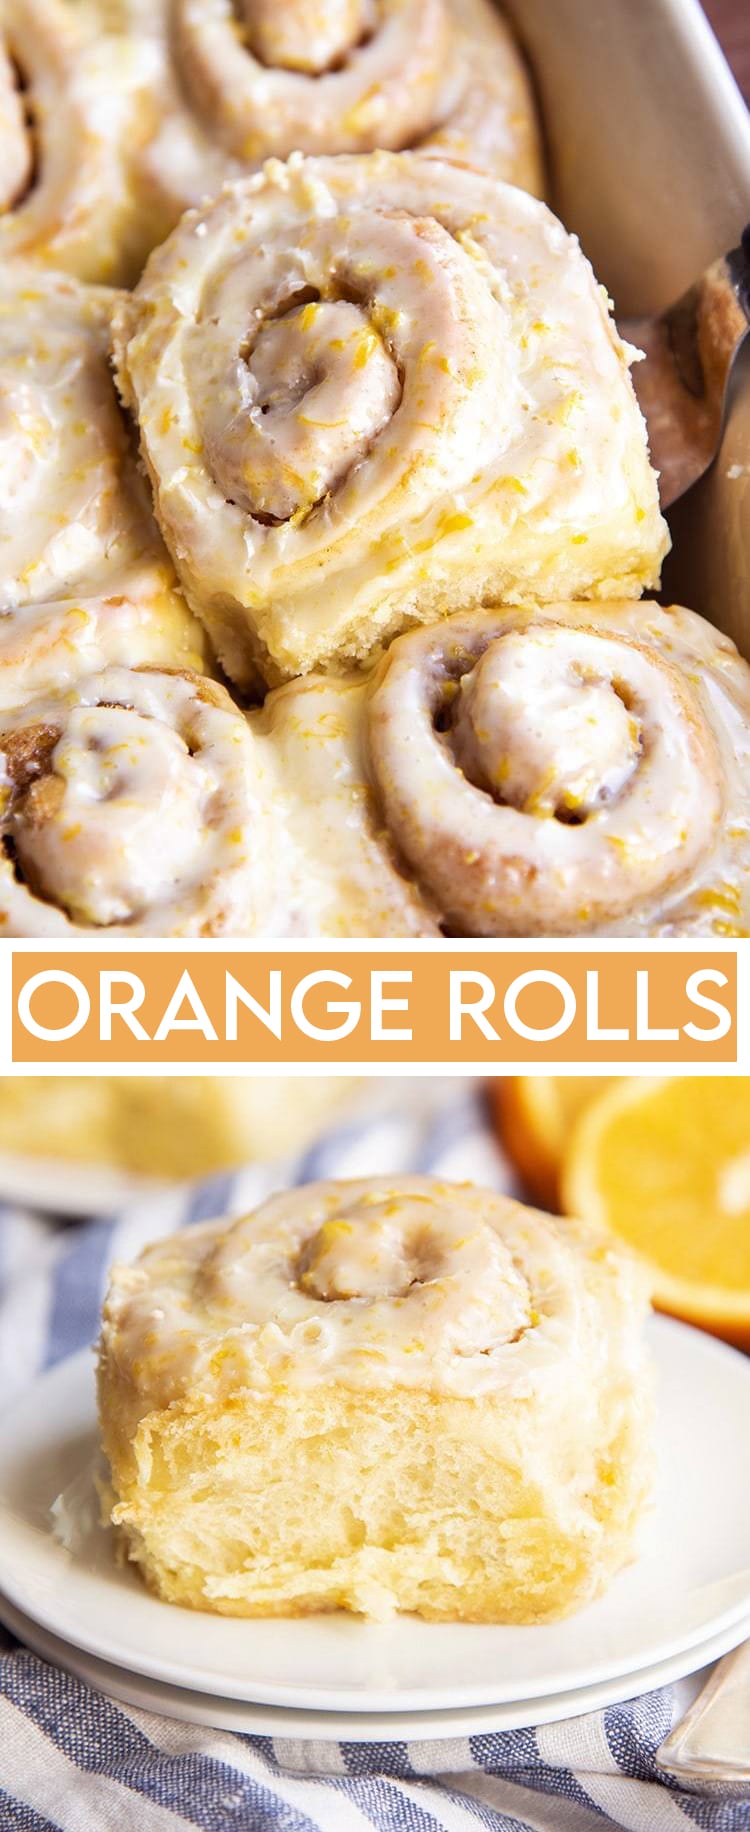 An orange sweet roll being pulled out of a baking pan with a spatula underneath